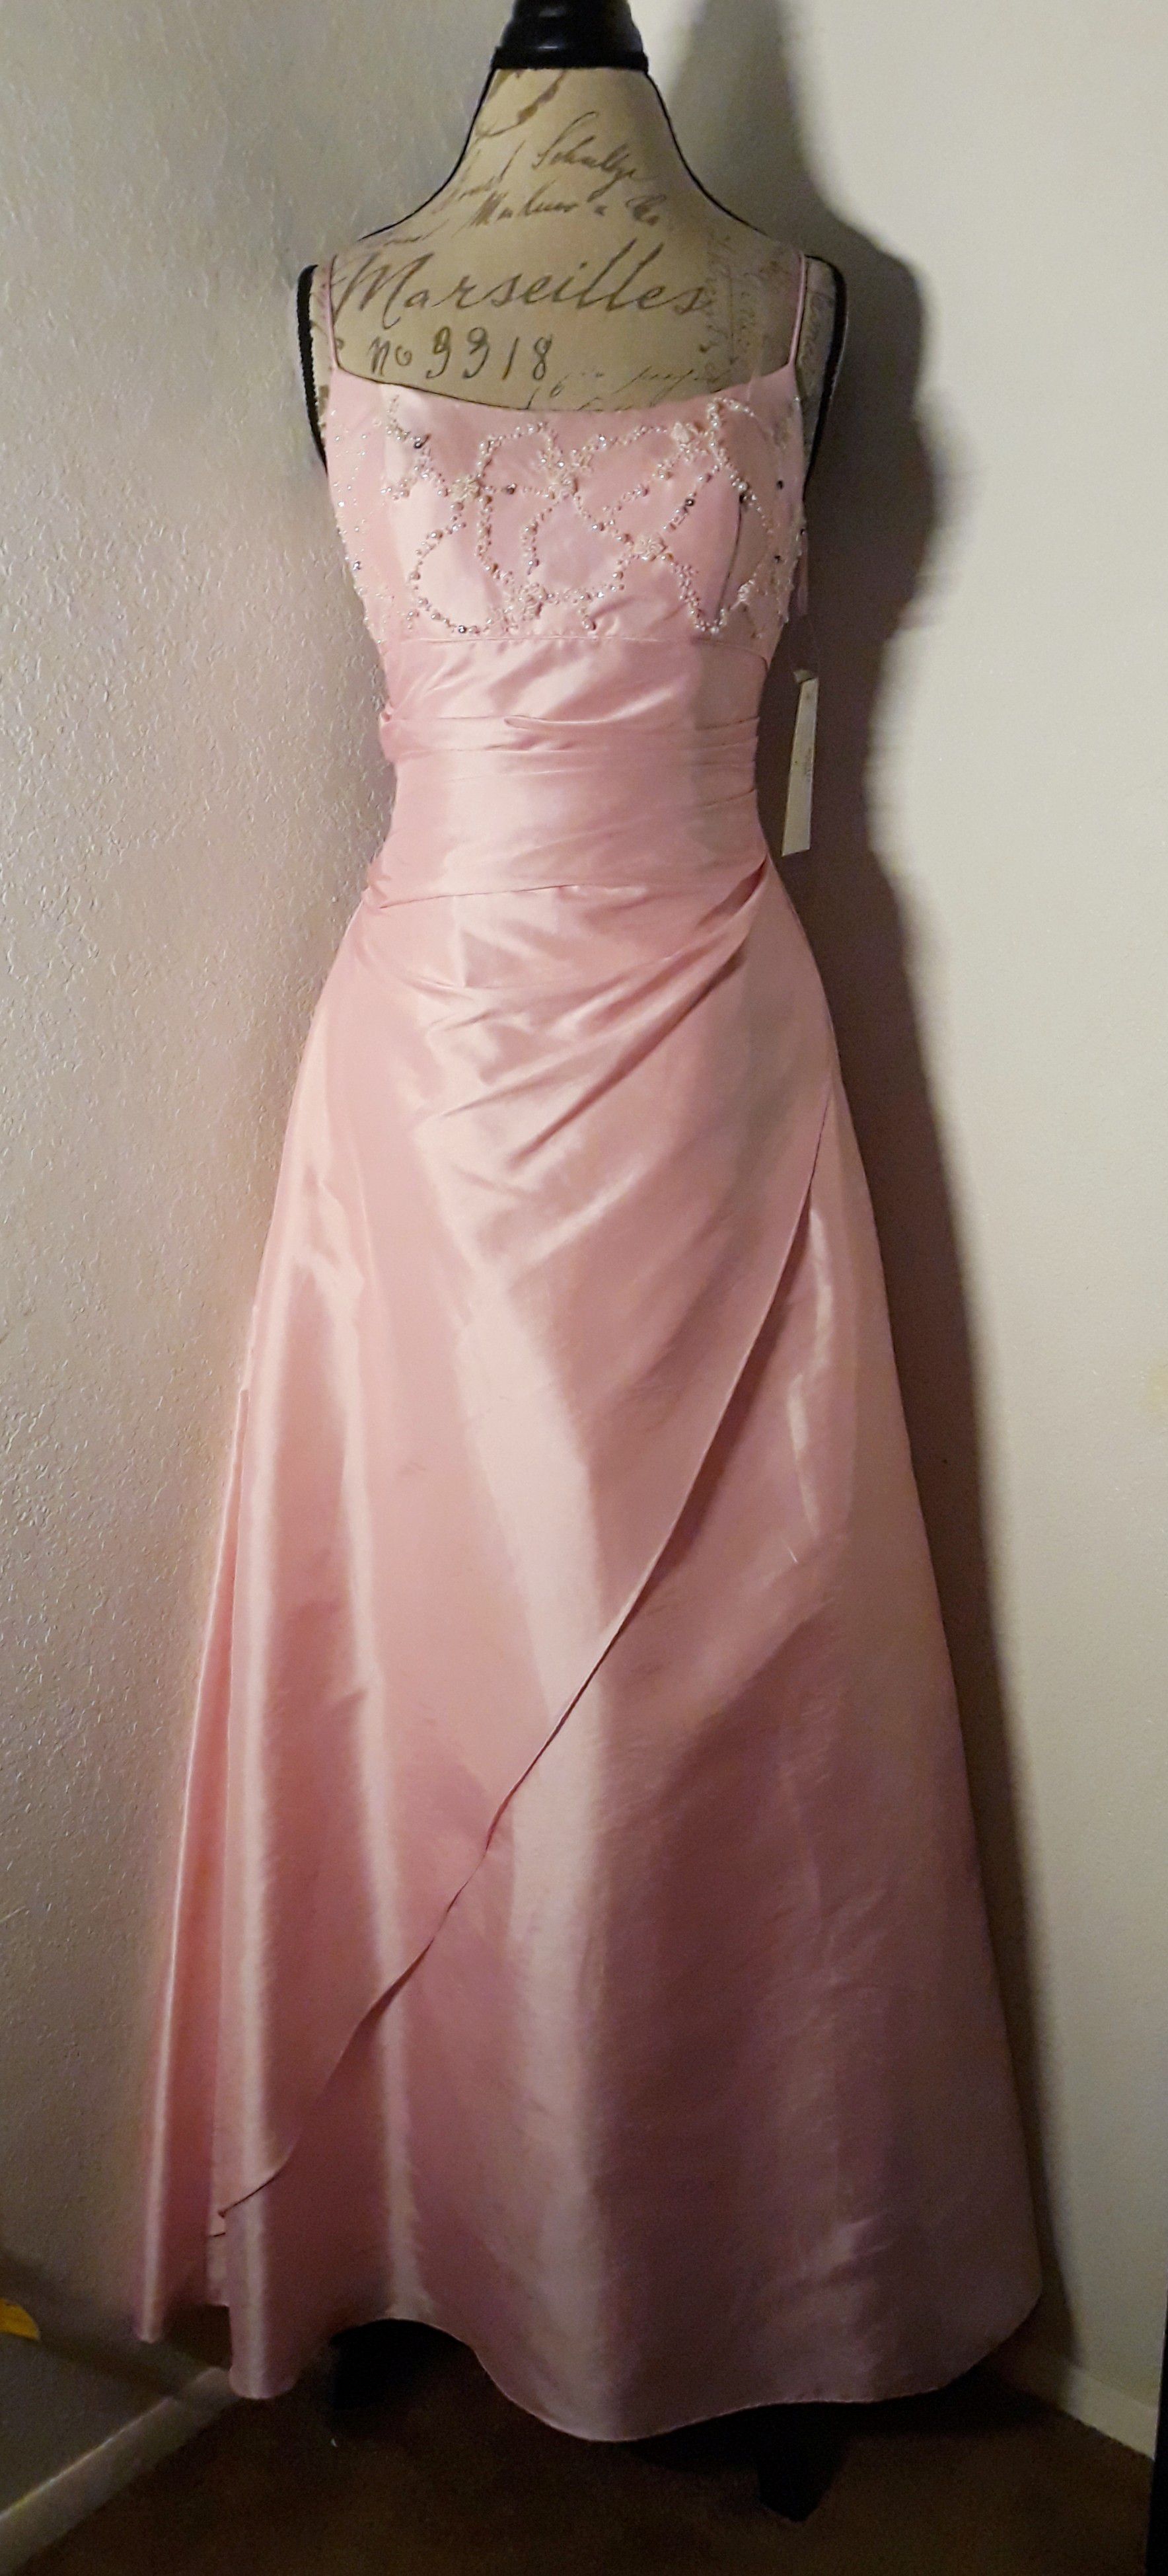 Drop Dead Gorgeous Pale Pink Formal Dress With Beaded Detail on Chest Sz 8